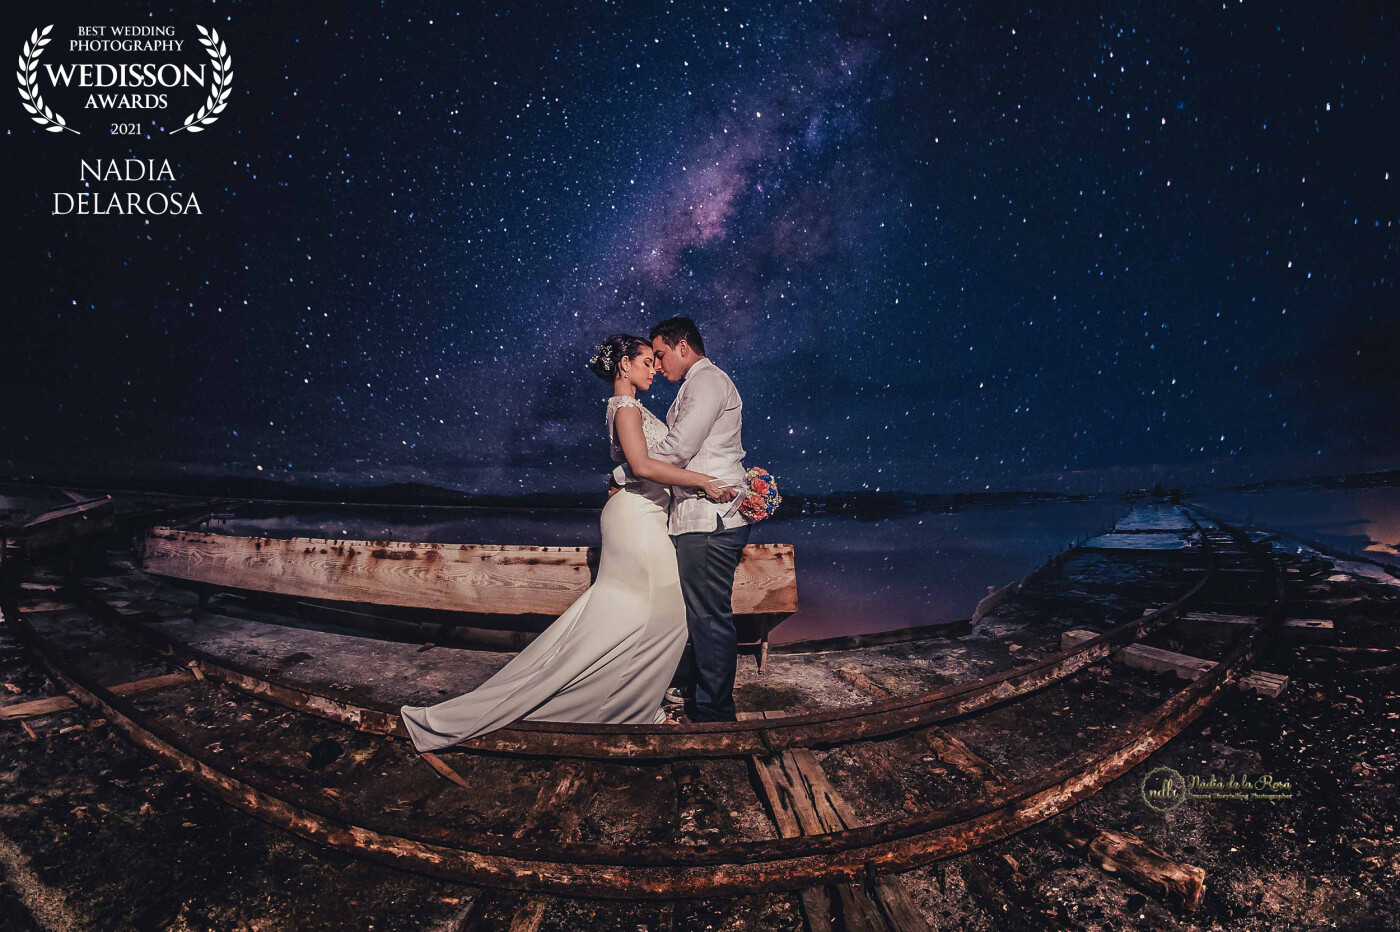 Gustavo and Berioska, a couple who wanted a session before their wedding, which was an unusual session. That day the night conspired with us and the sky was quite a spectacle. Their complicity as a couple could be felt in that beautiful place on my beloved island, the Dominican Republic.<br />
Puerto Hermos, Salinas de Bani, has given me my best images and this is one of them.